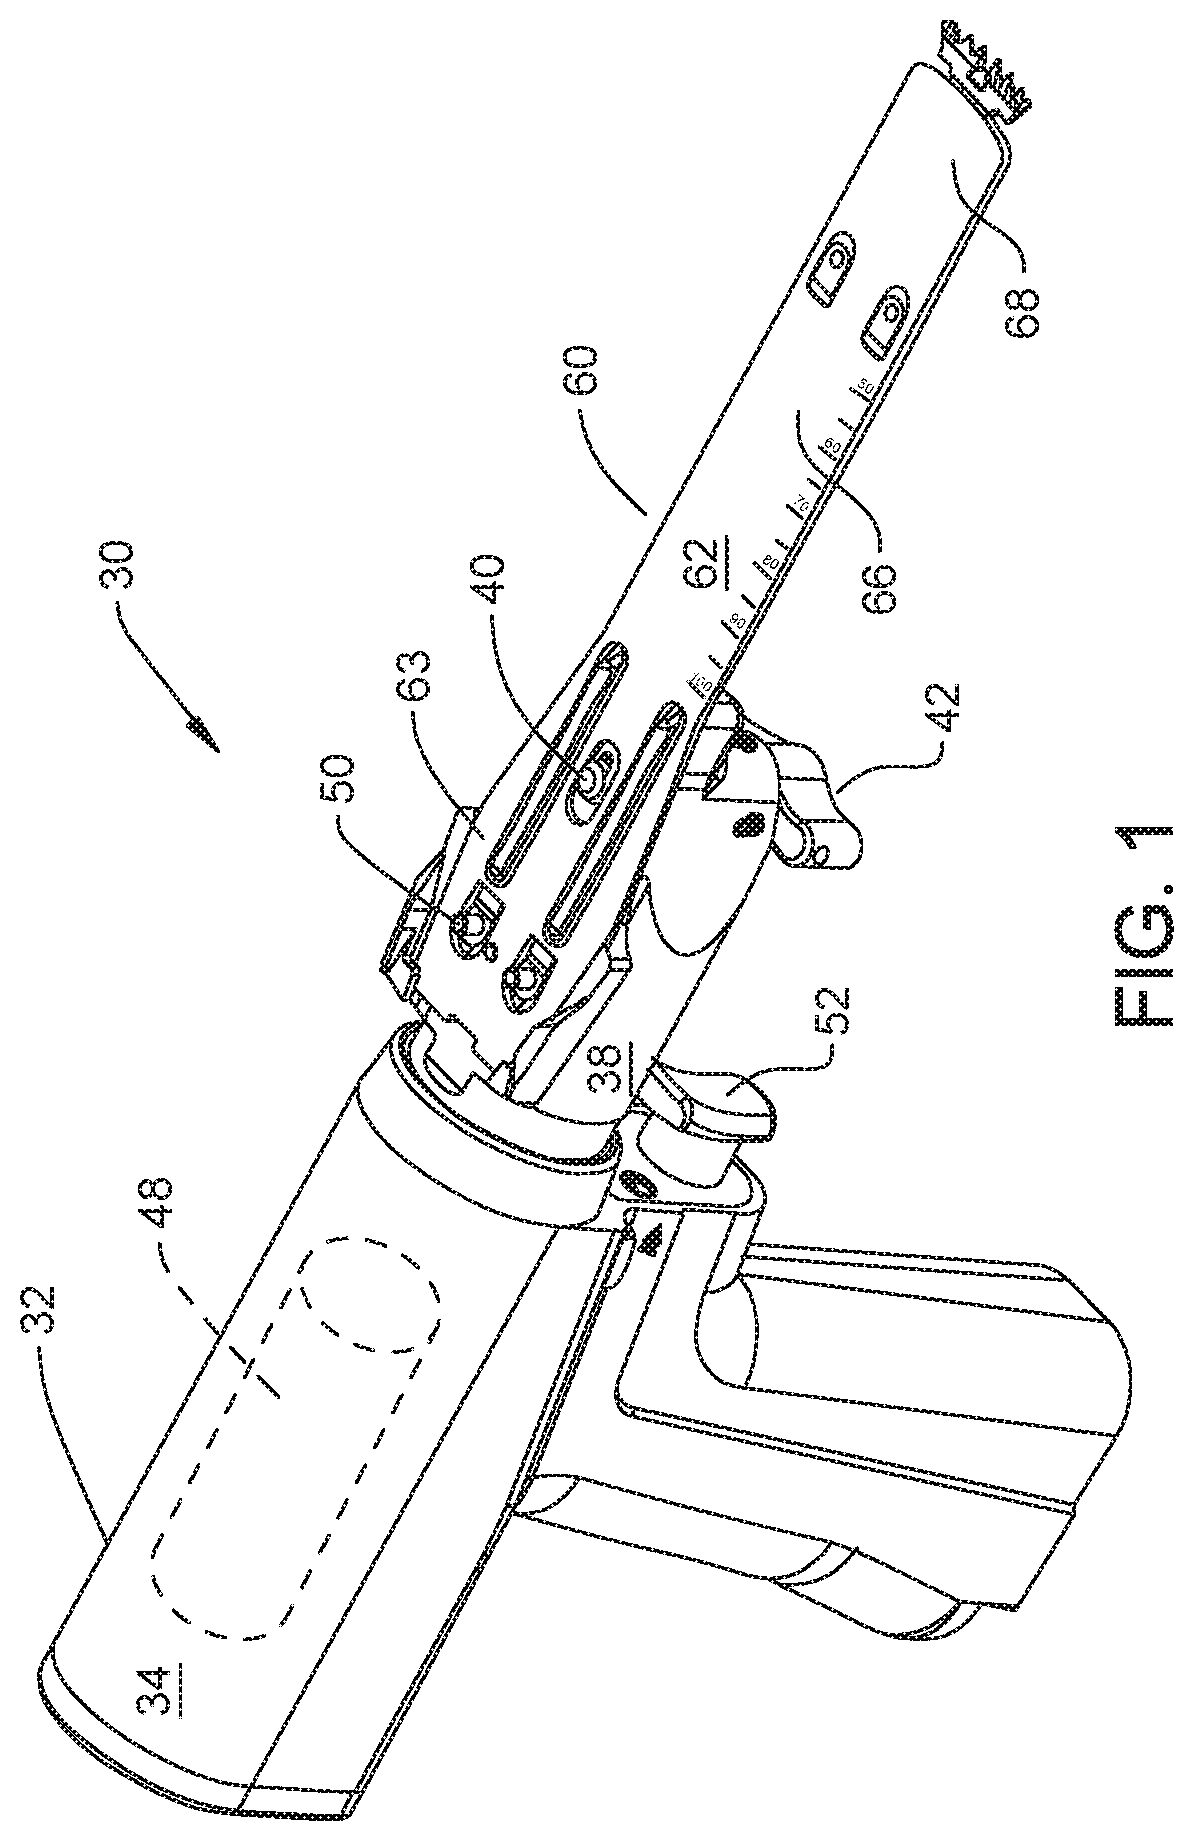 Surgical sagittal blade cartridge with a reinforced guide bar